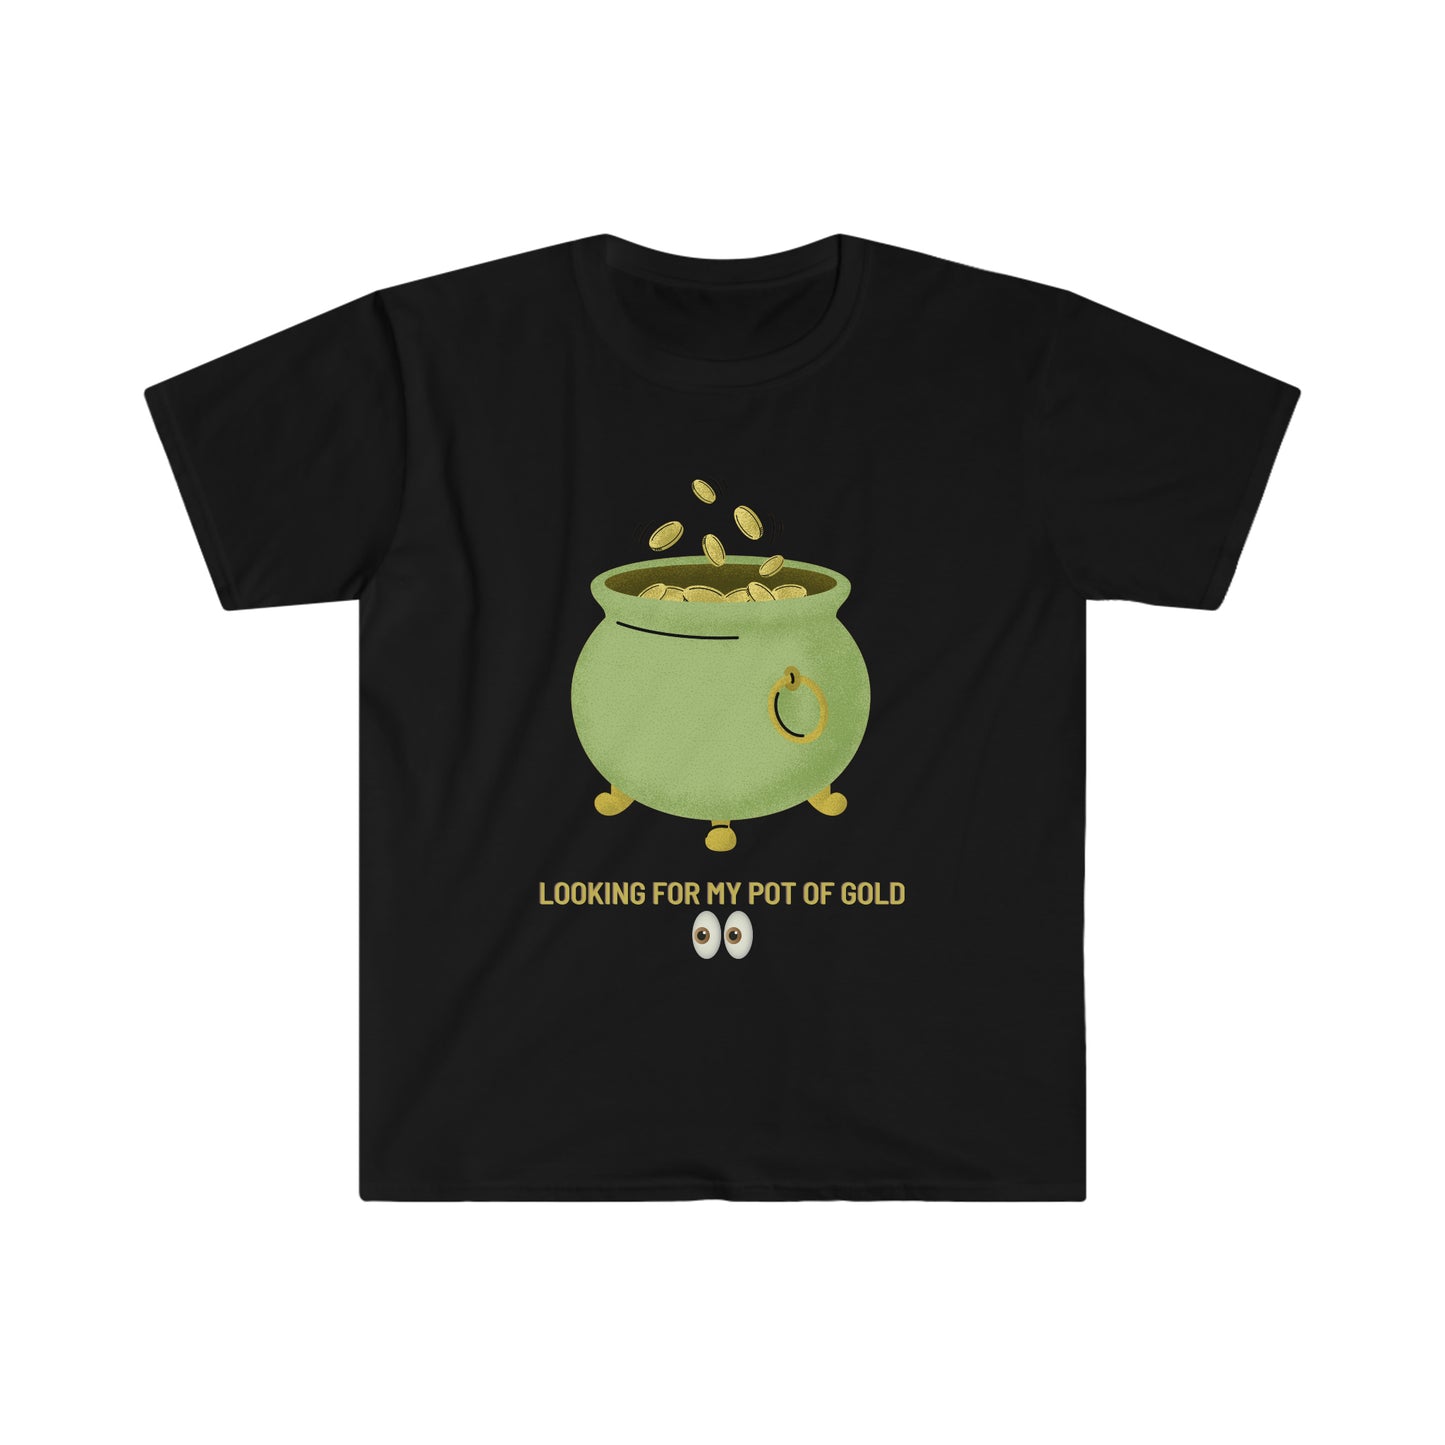 "Looking for my pot of gold" Essential Comfort Tee